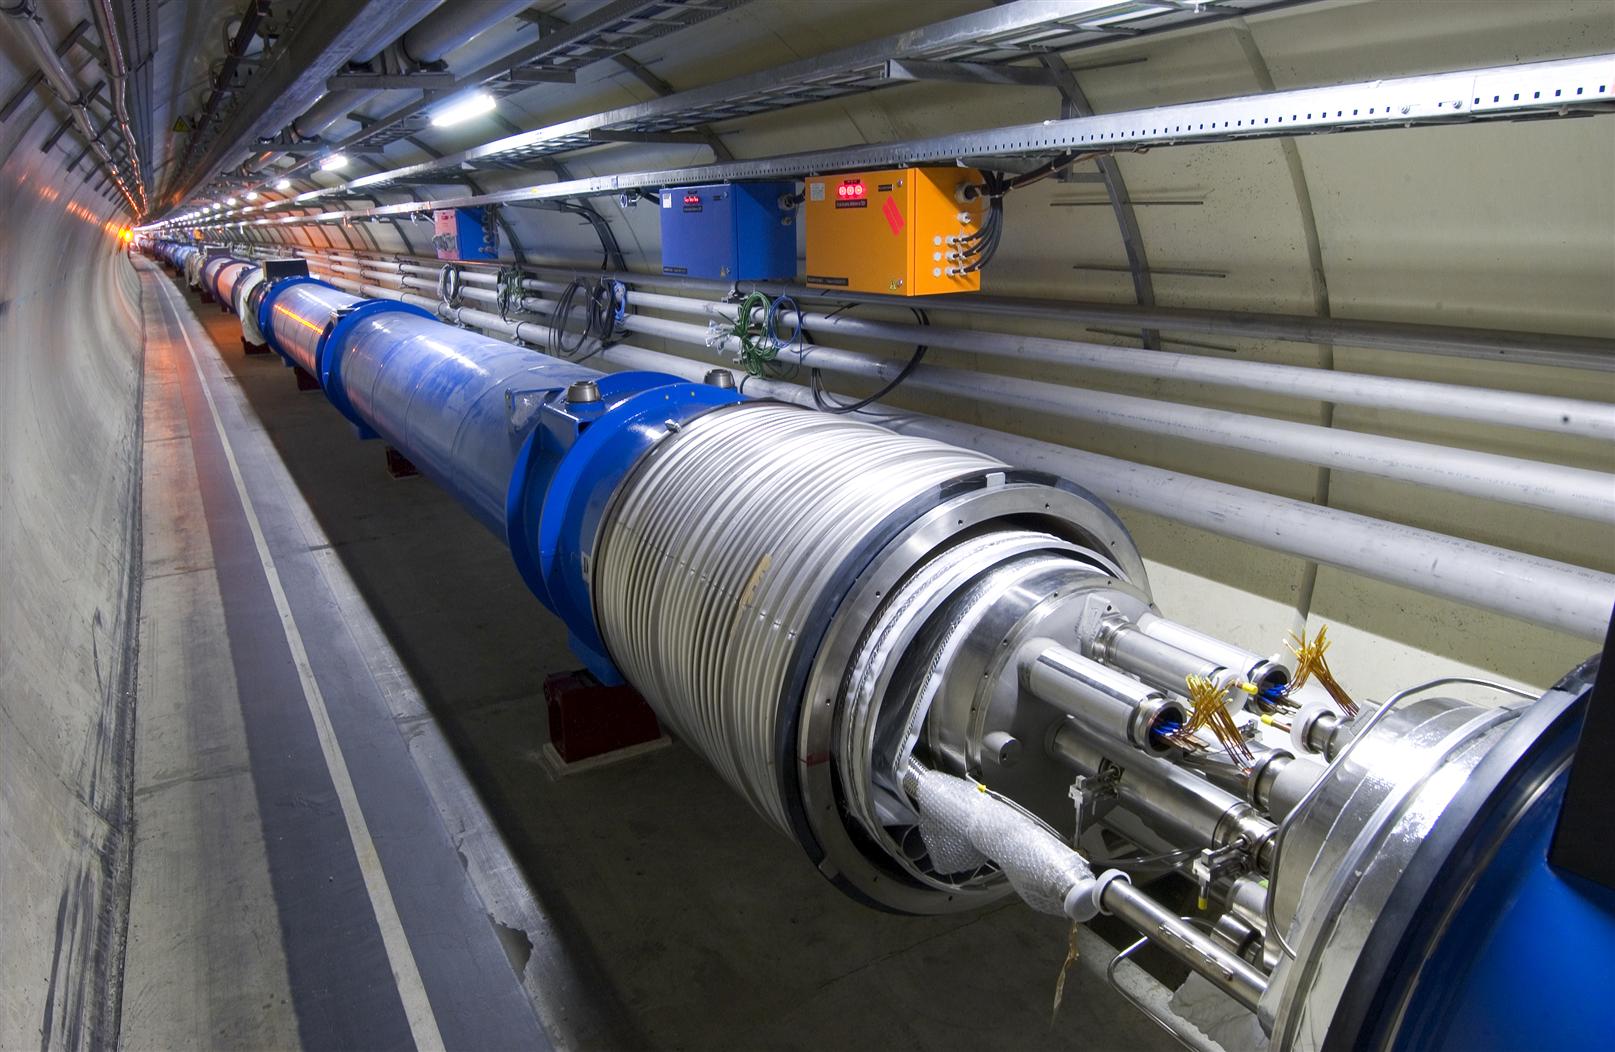 Large Hadron Collider,LHC,Magnet,Dipole,Superconducting,Interconnection,Tunnel